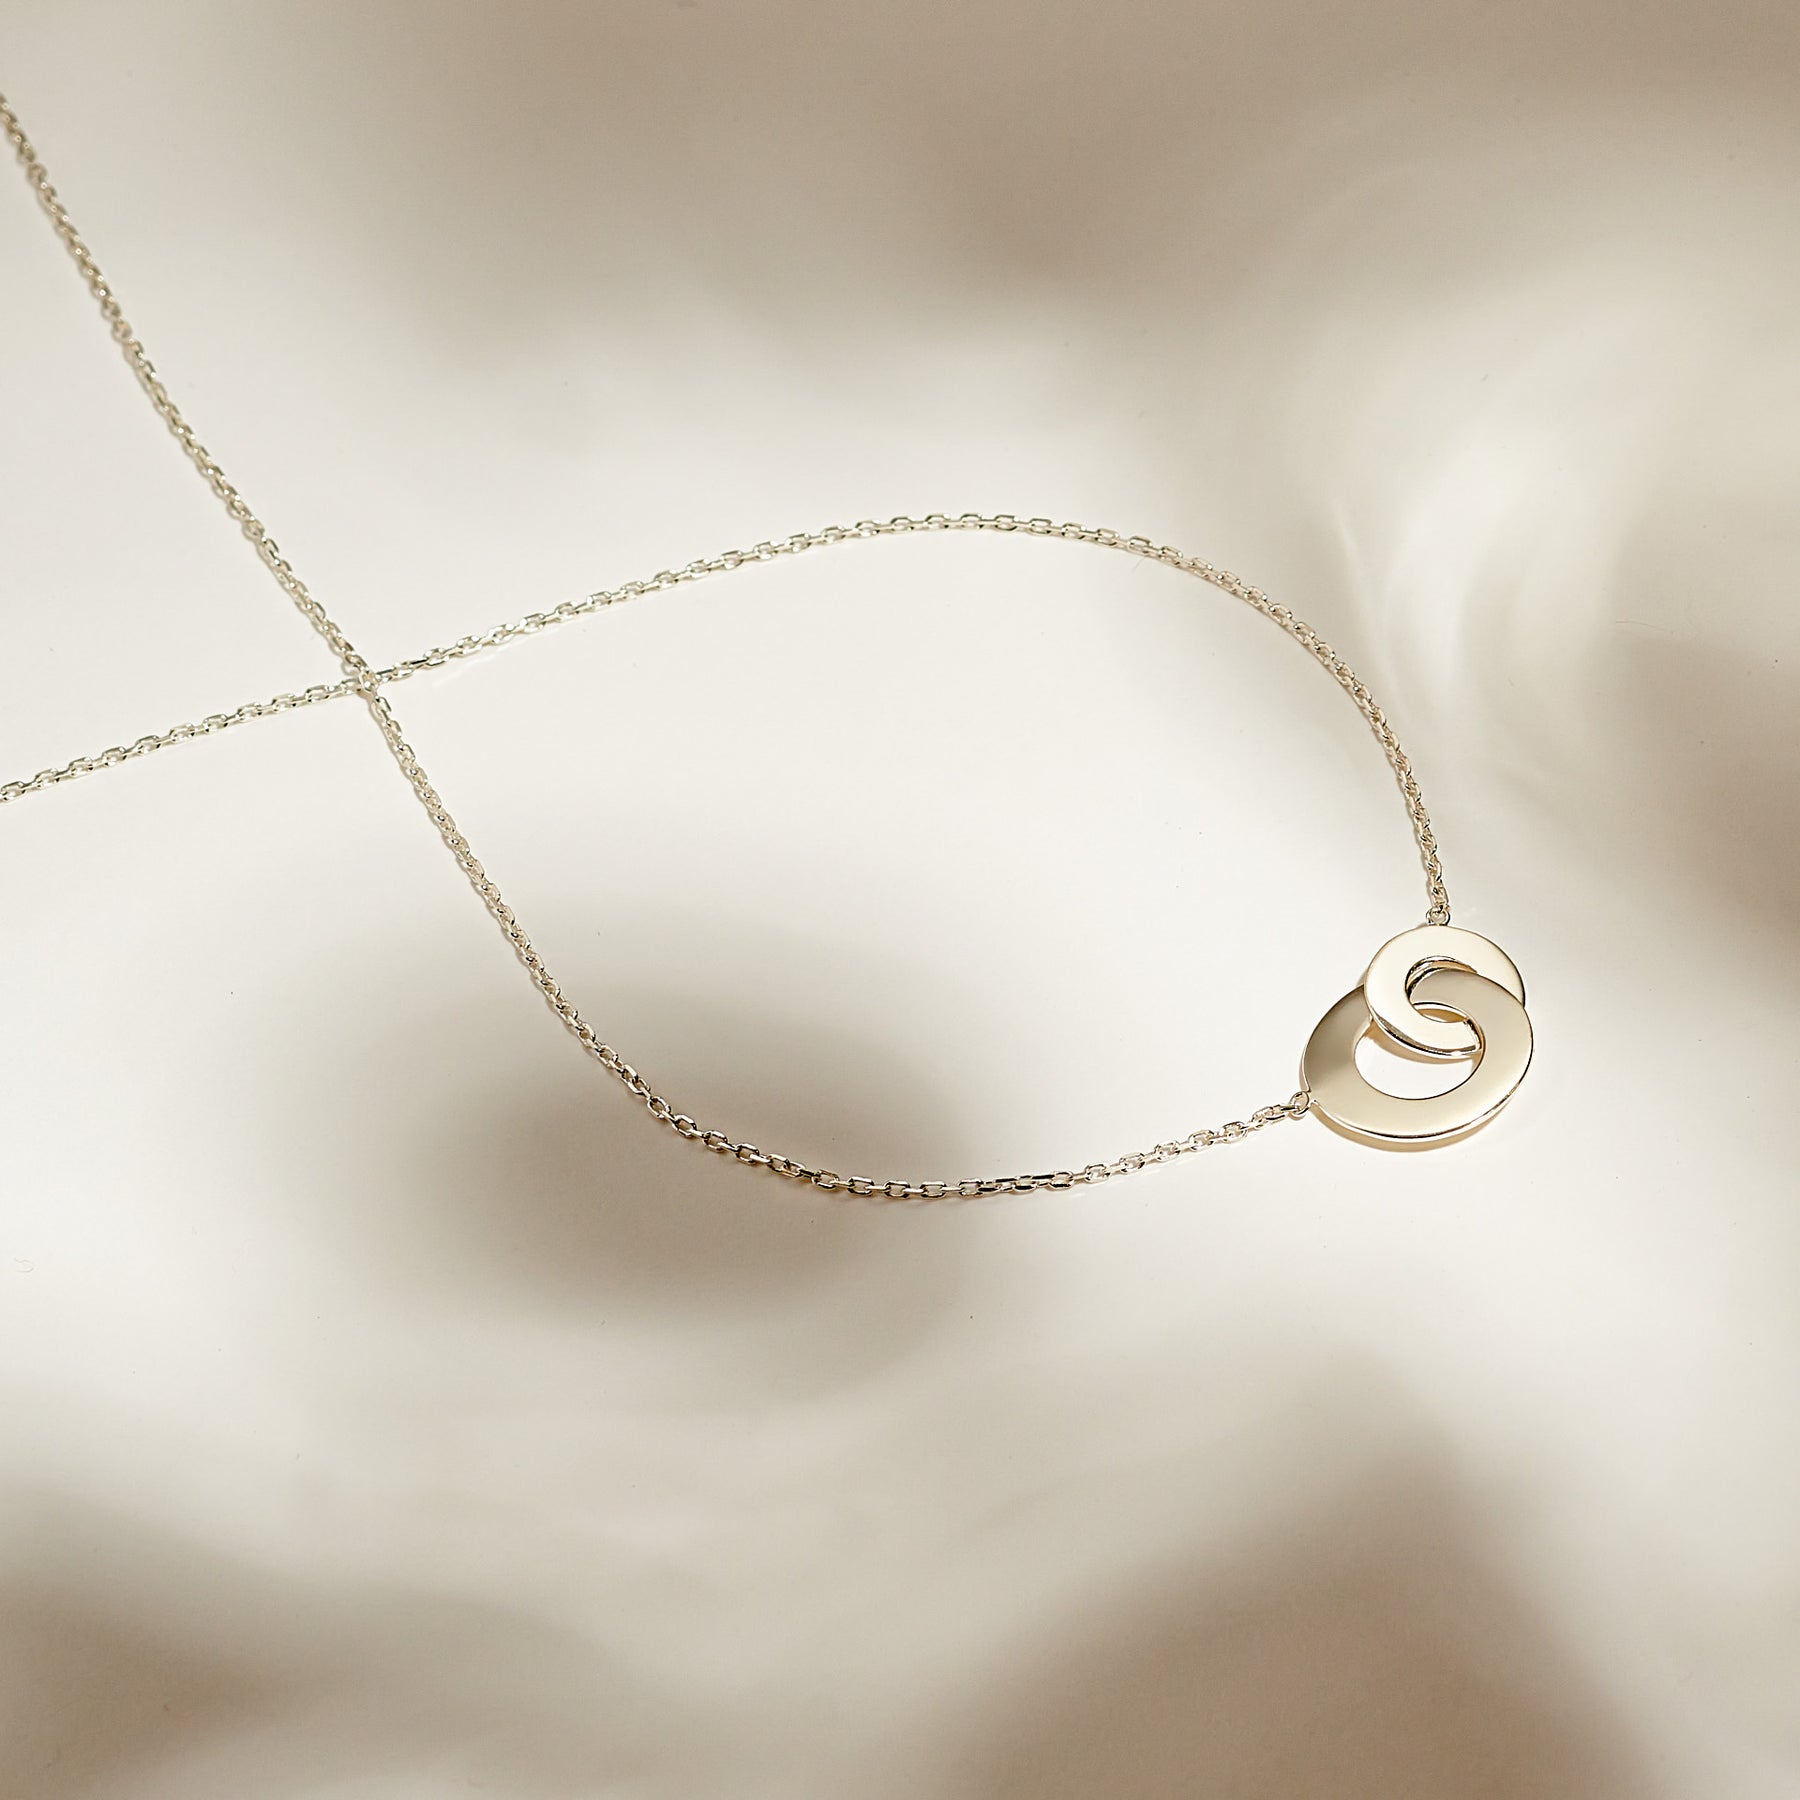 Collier "Infinity" argent